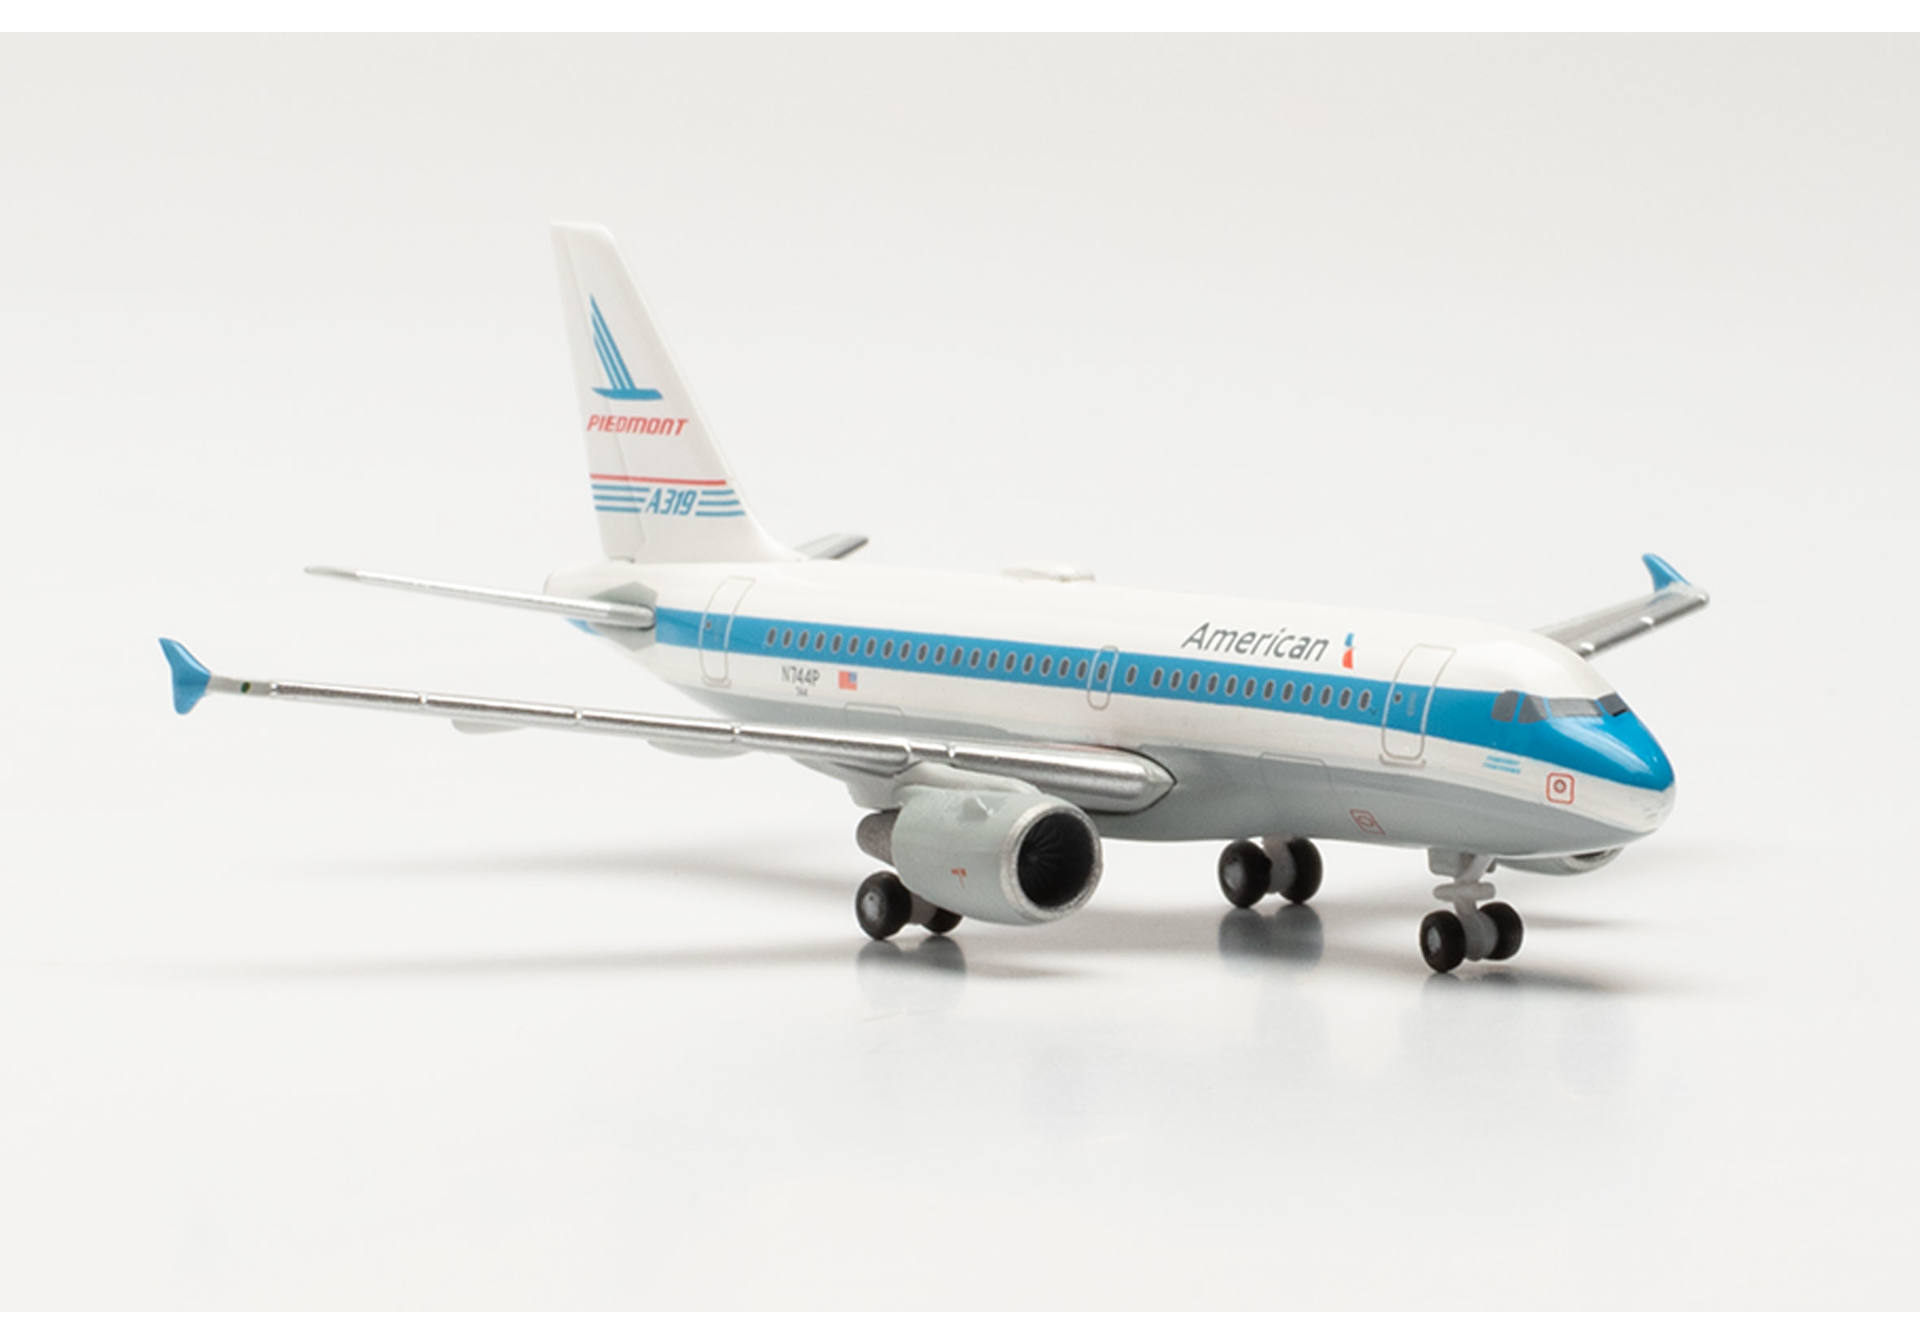 AIRBUS A319 PIEDMONT HERITAGE LIVERY BLEU HERPA 1/500°